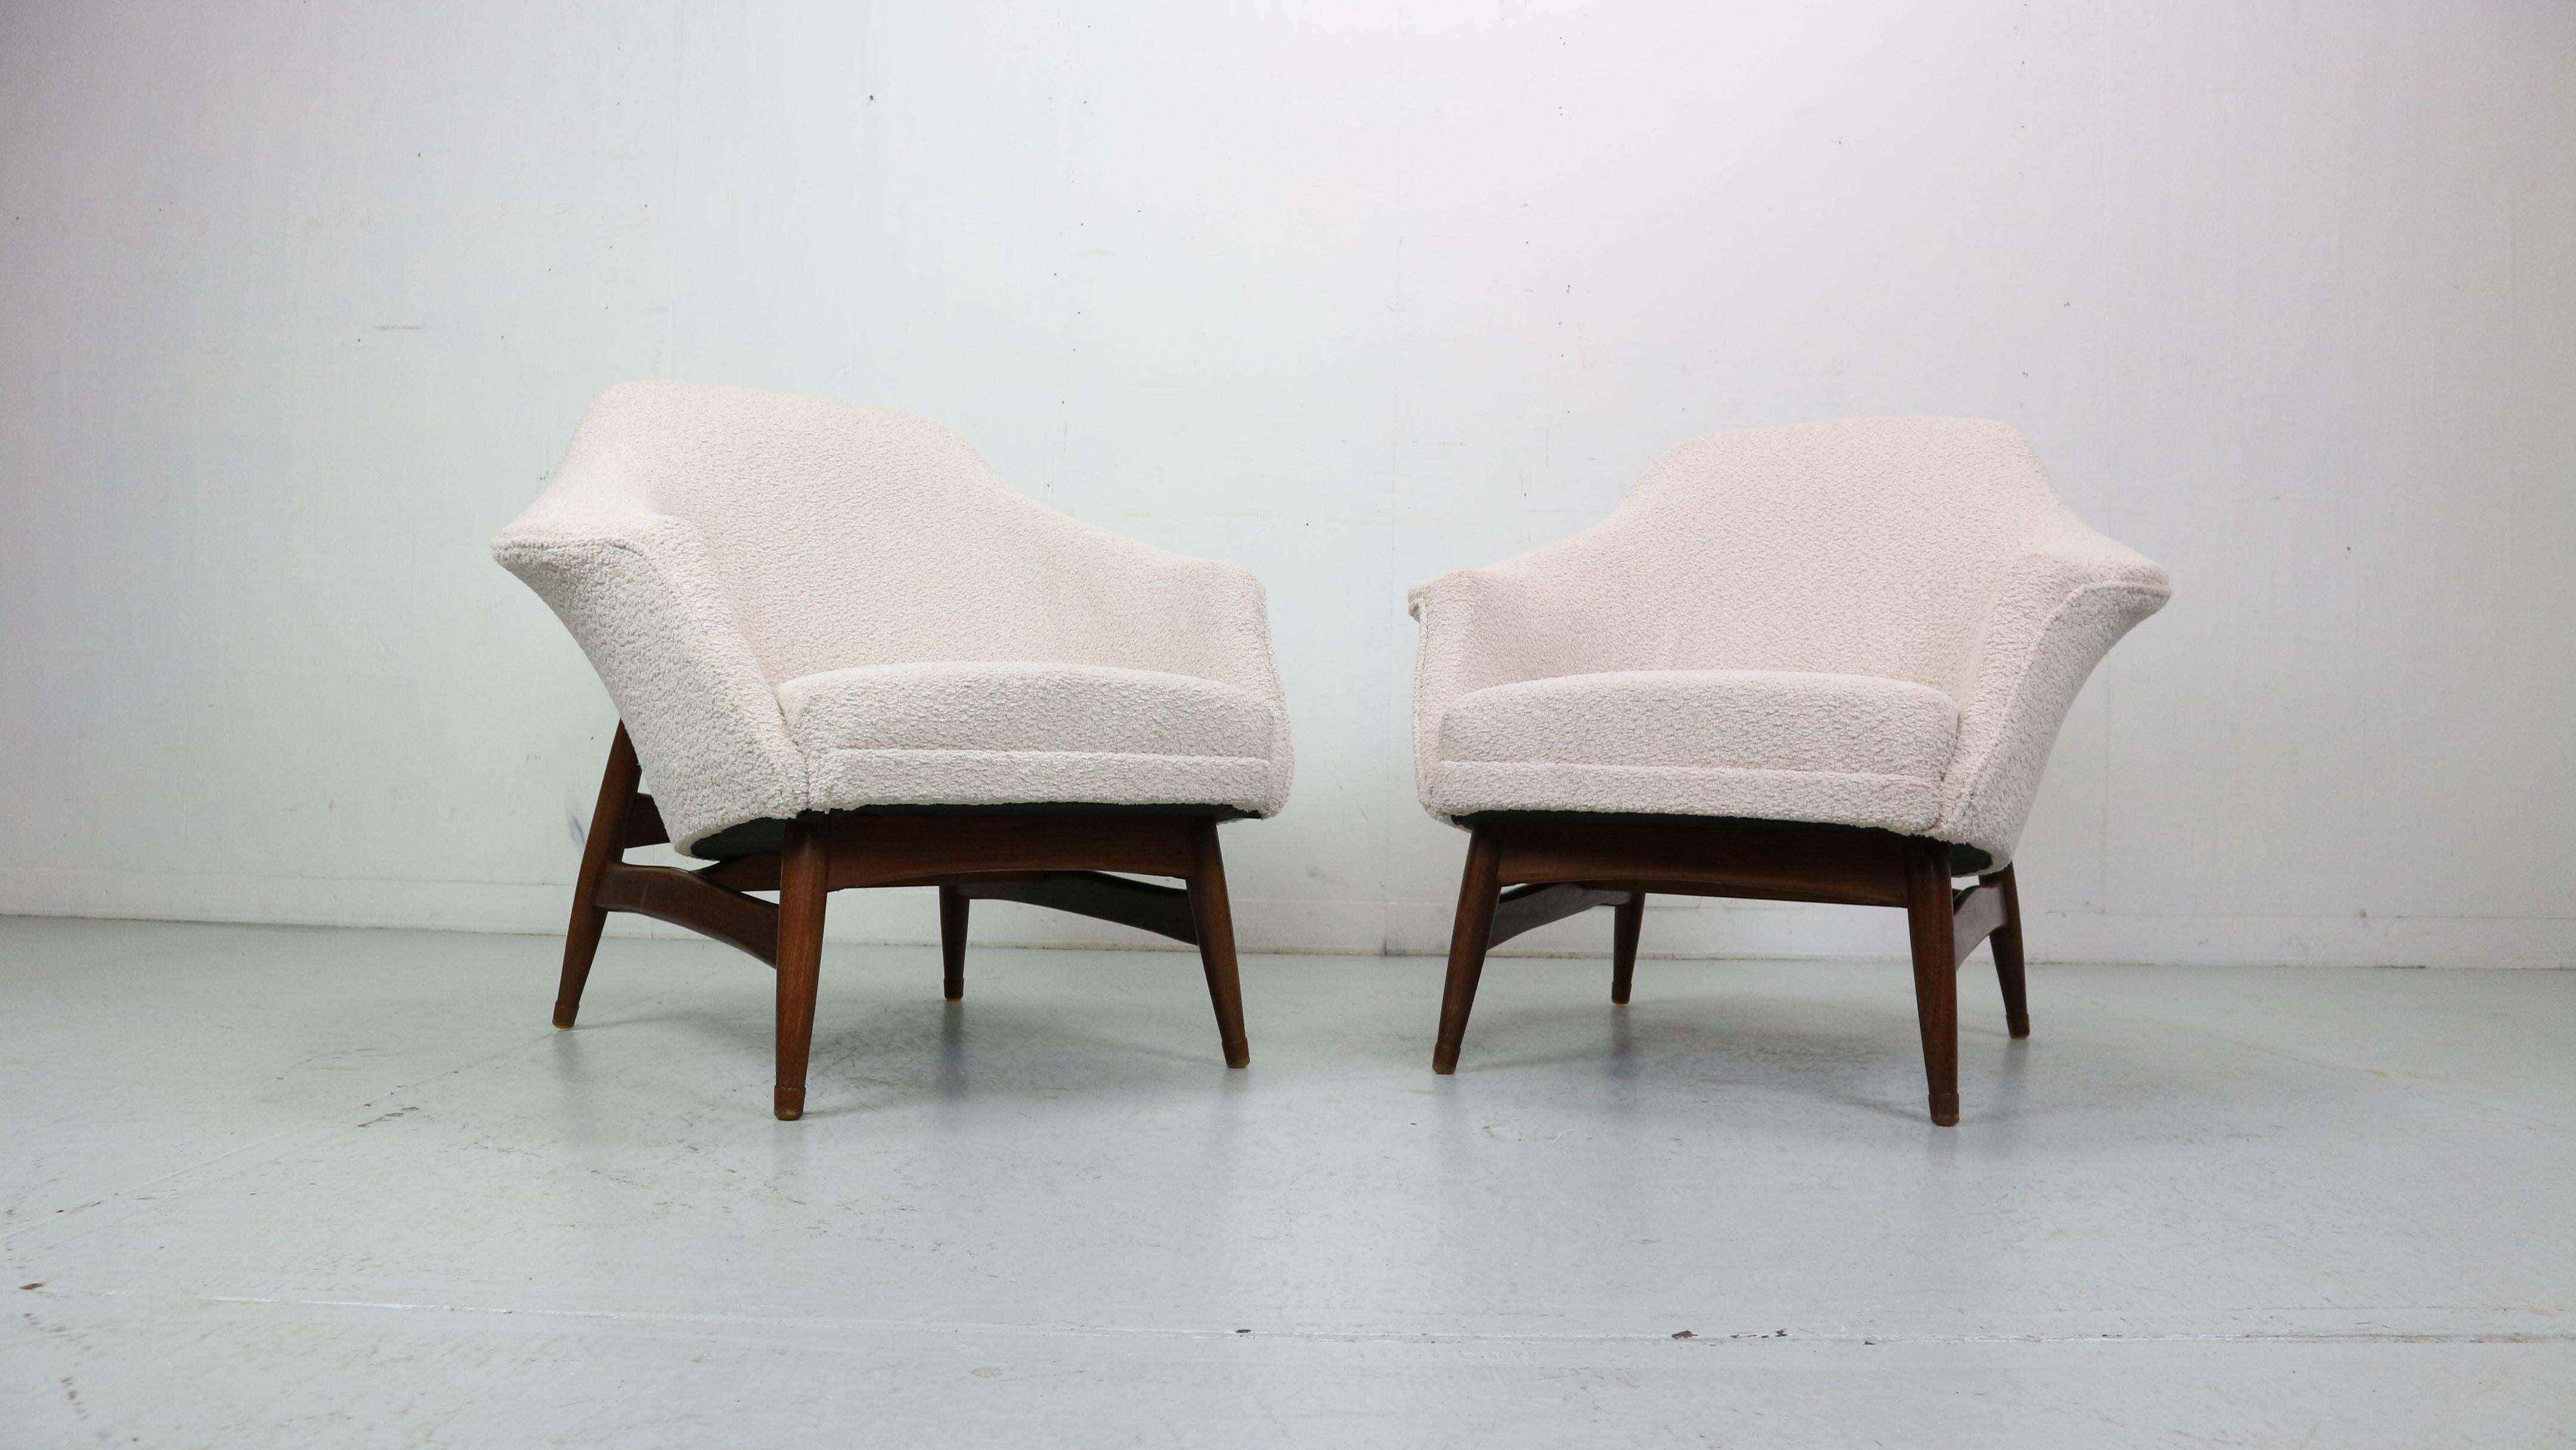 Polish Pair of Mid-Century Modern Boucle Fabric Armchairs by Julia Gaubek -  1950's For Sale